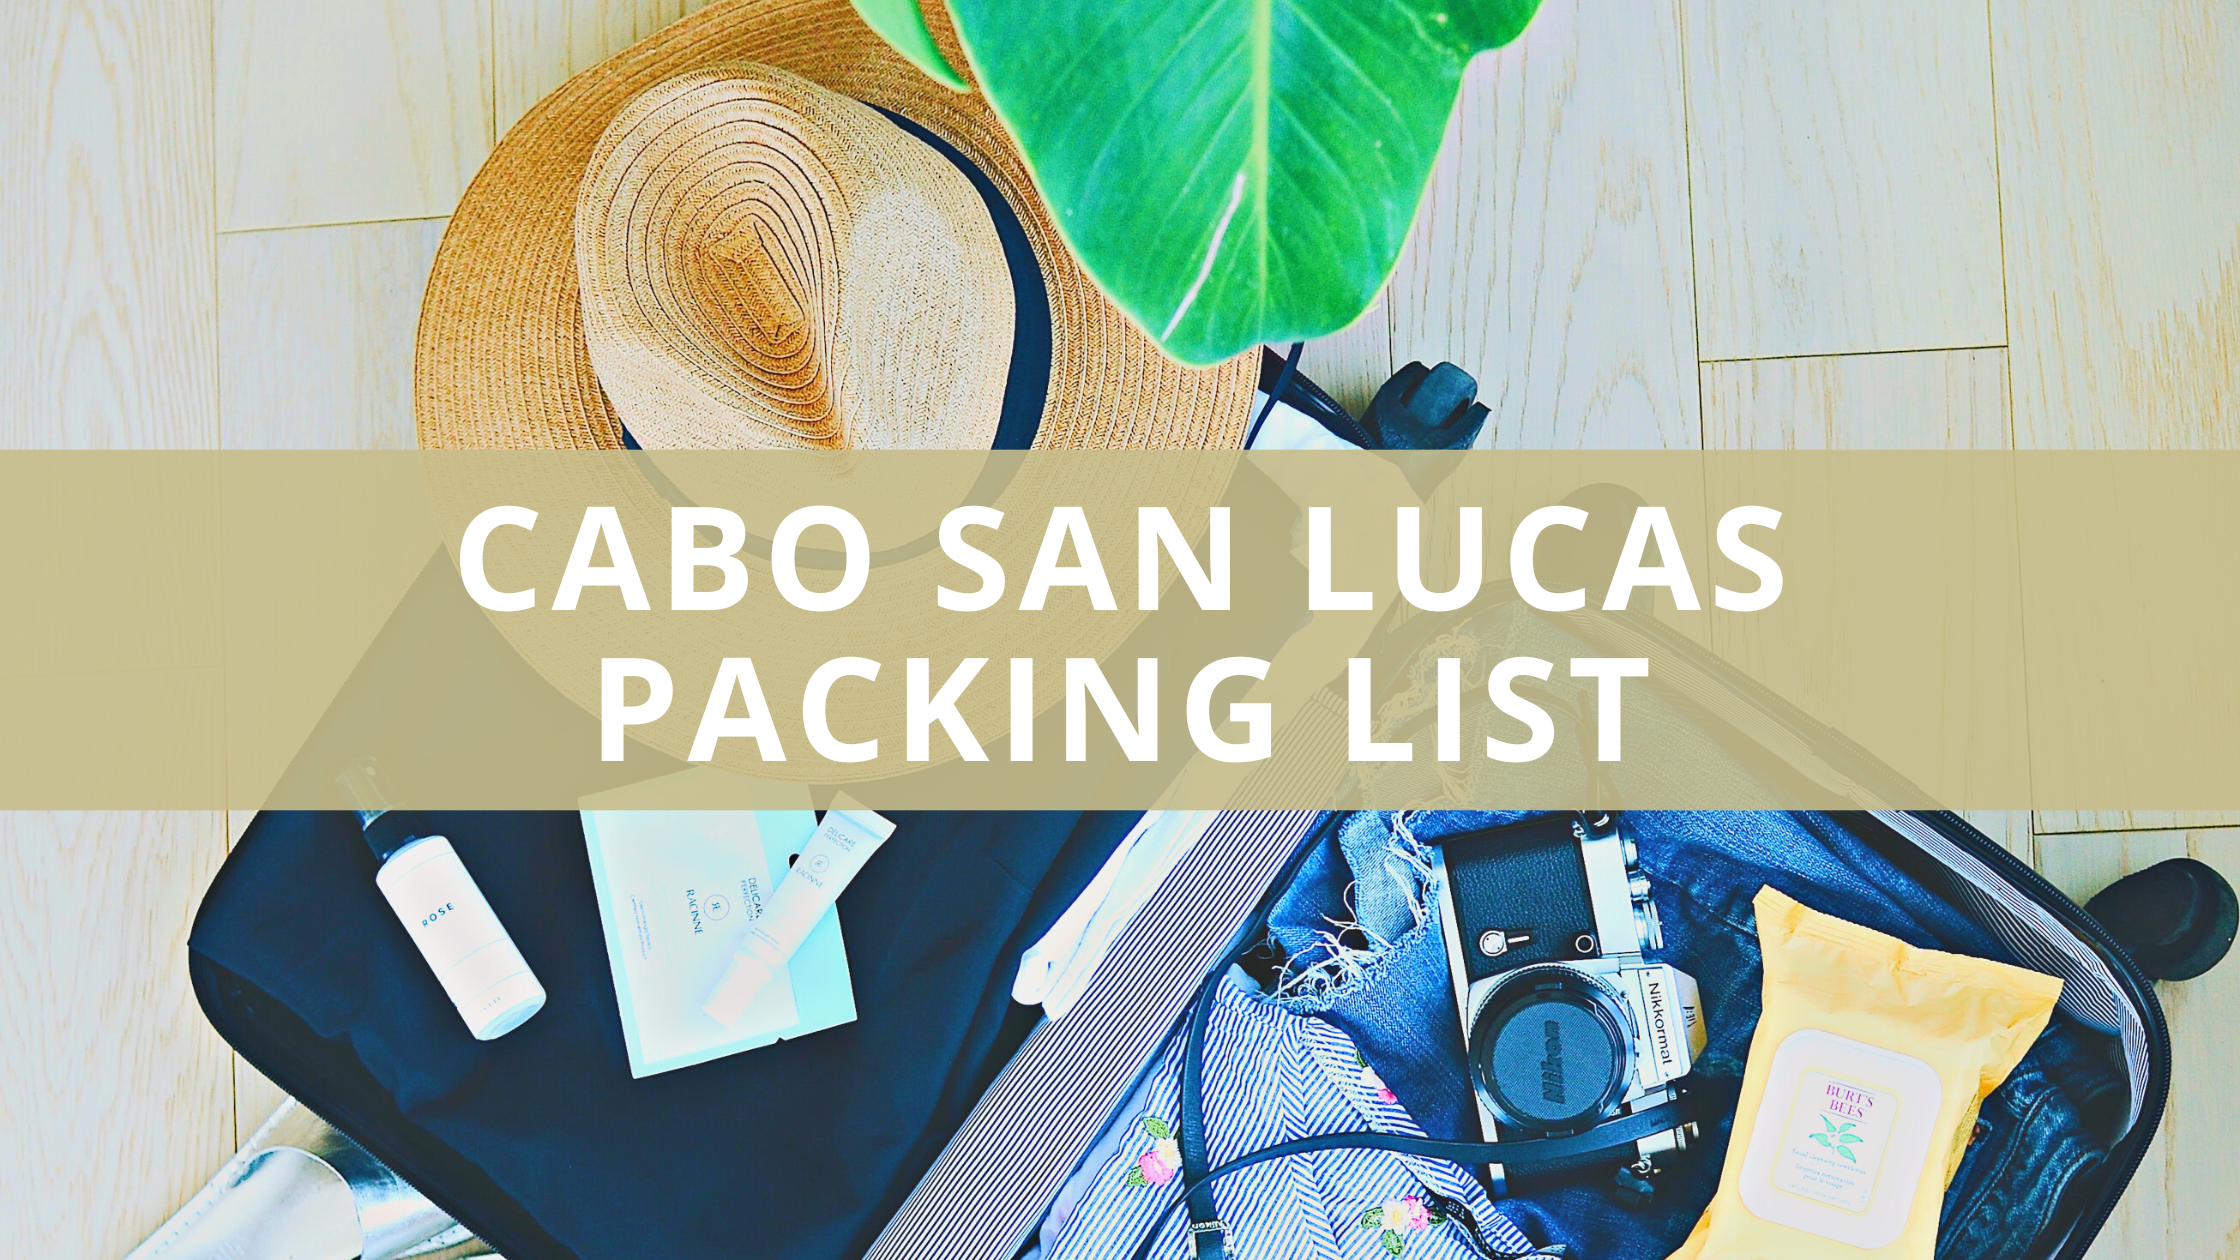 Cabo San Lucas Packing List